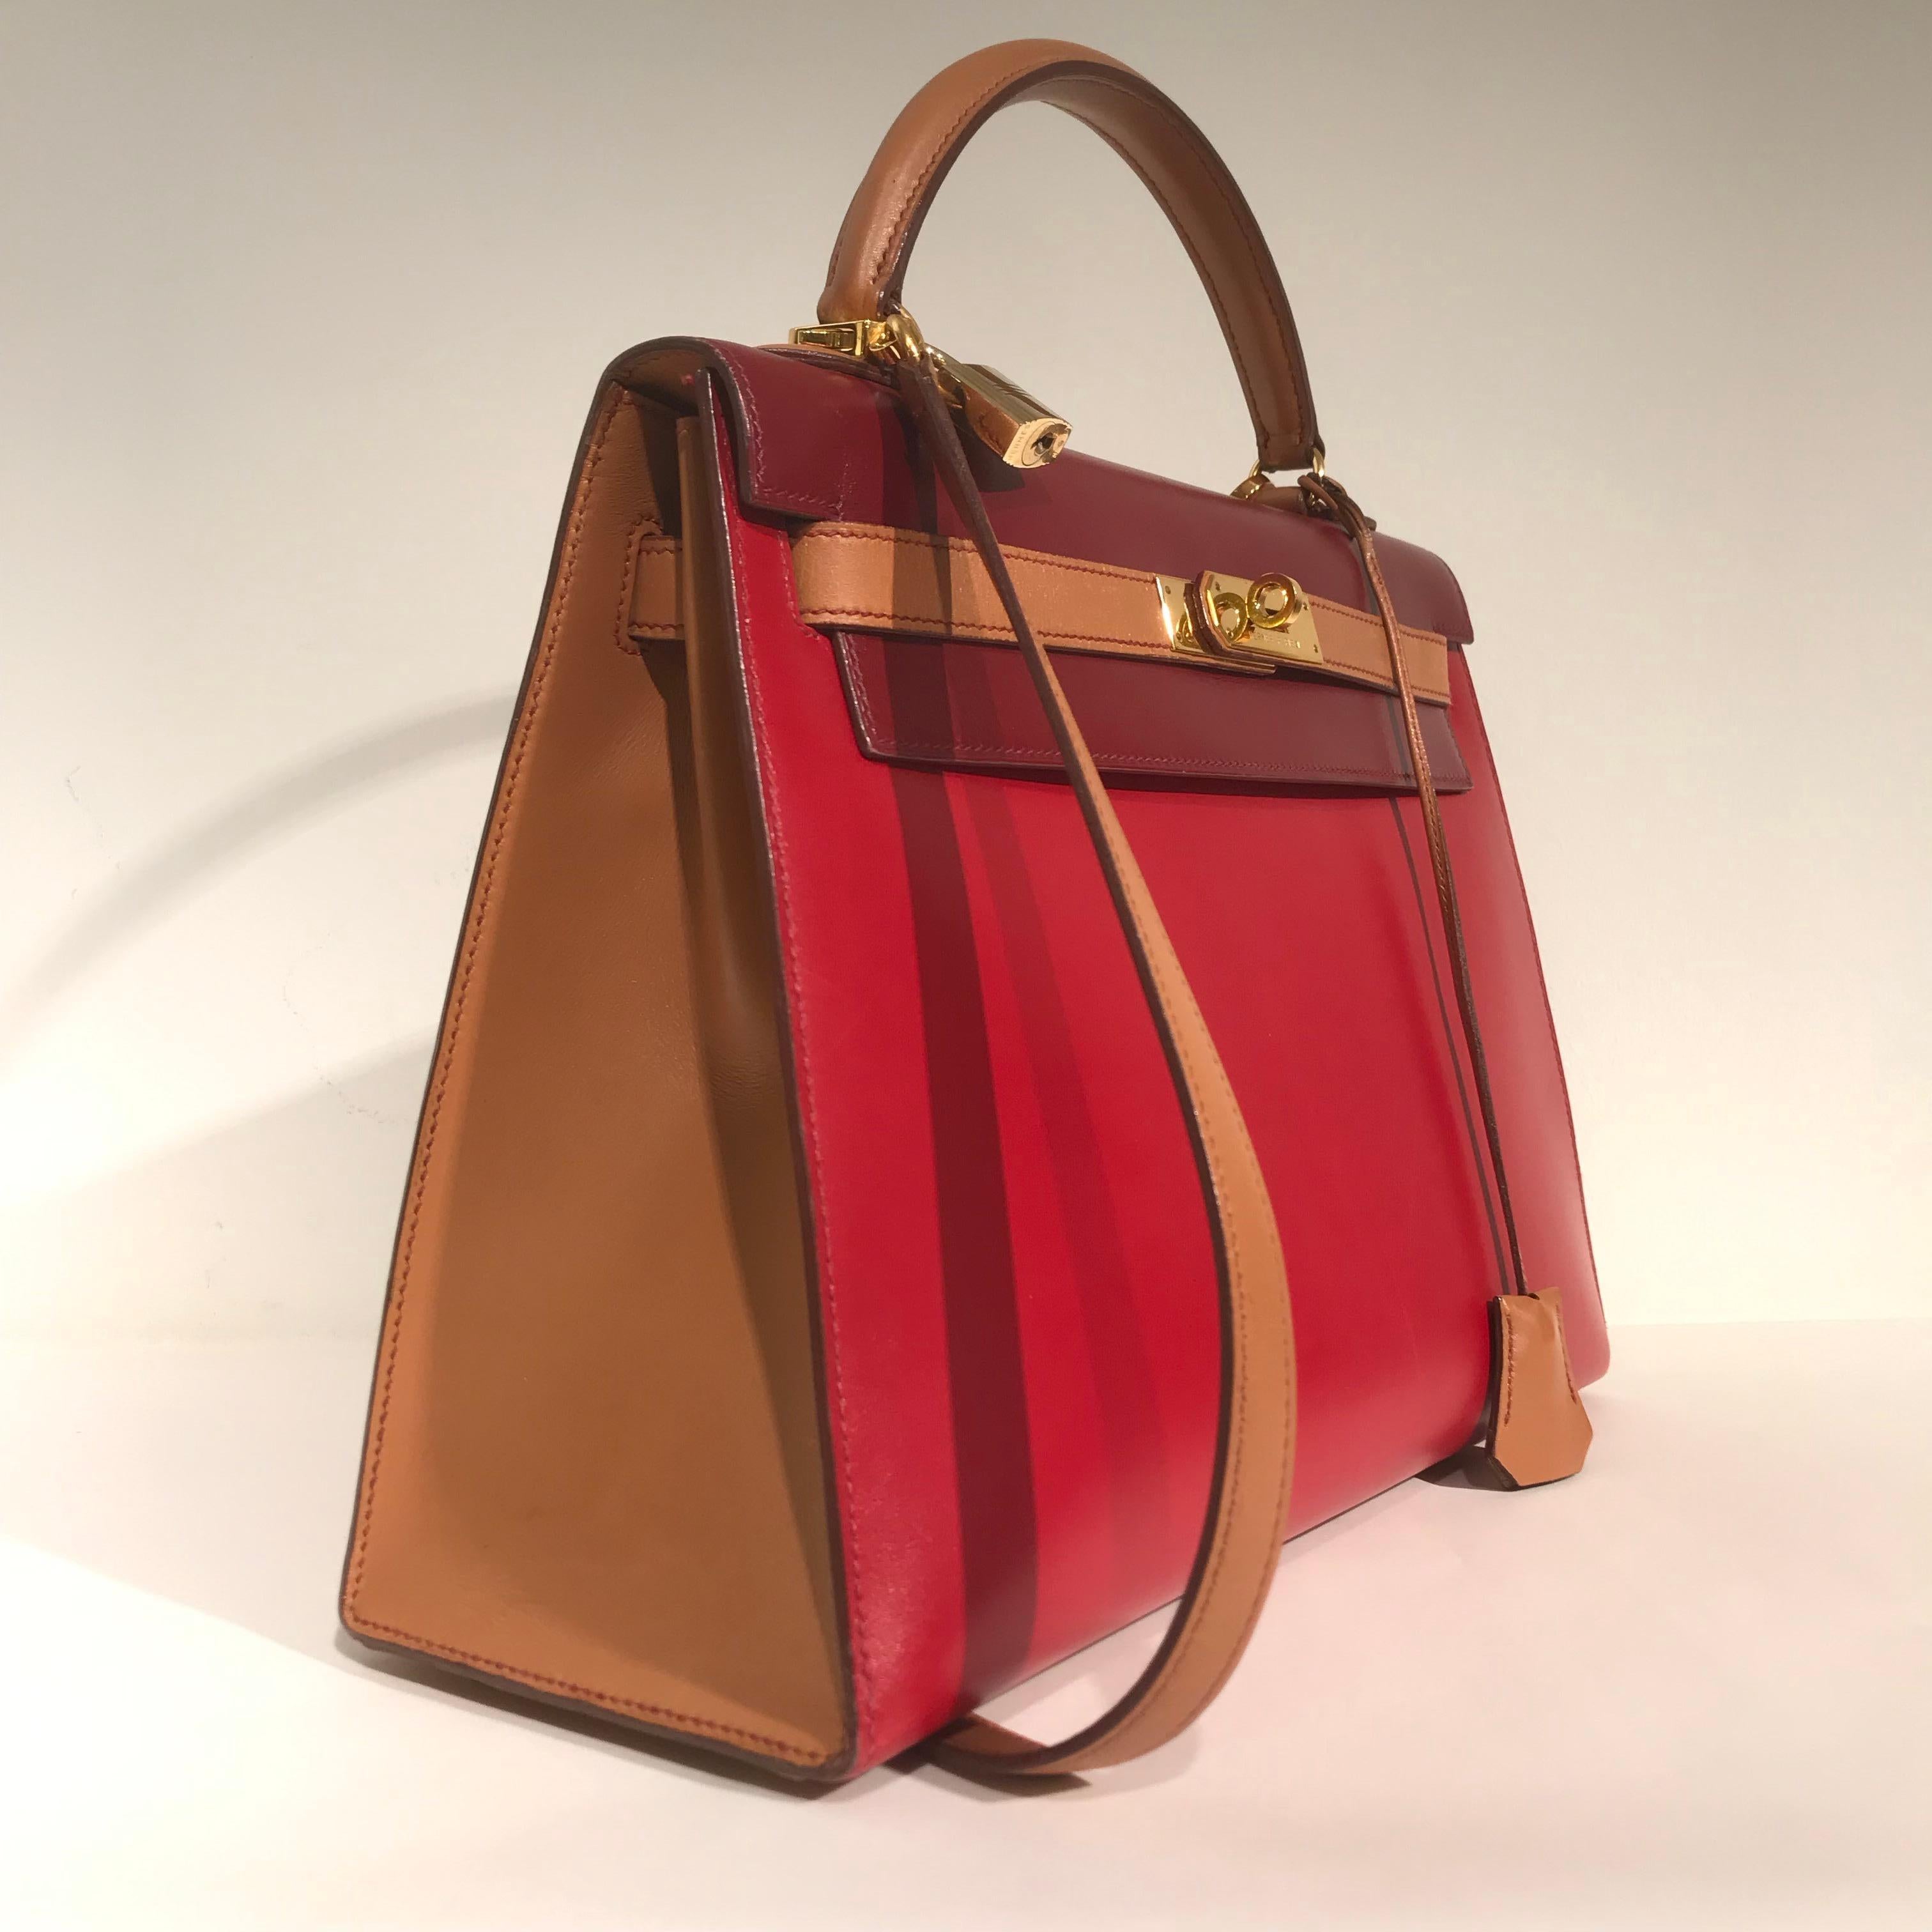 20th Century Hermes Tricolor Kelly Bag